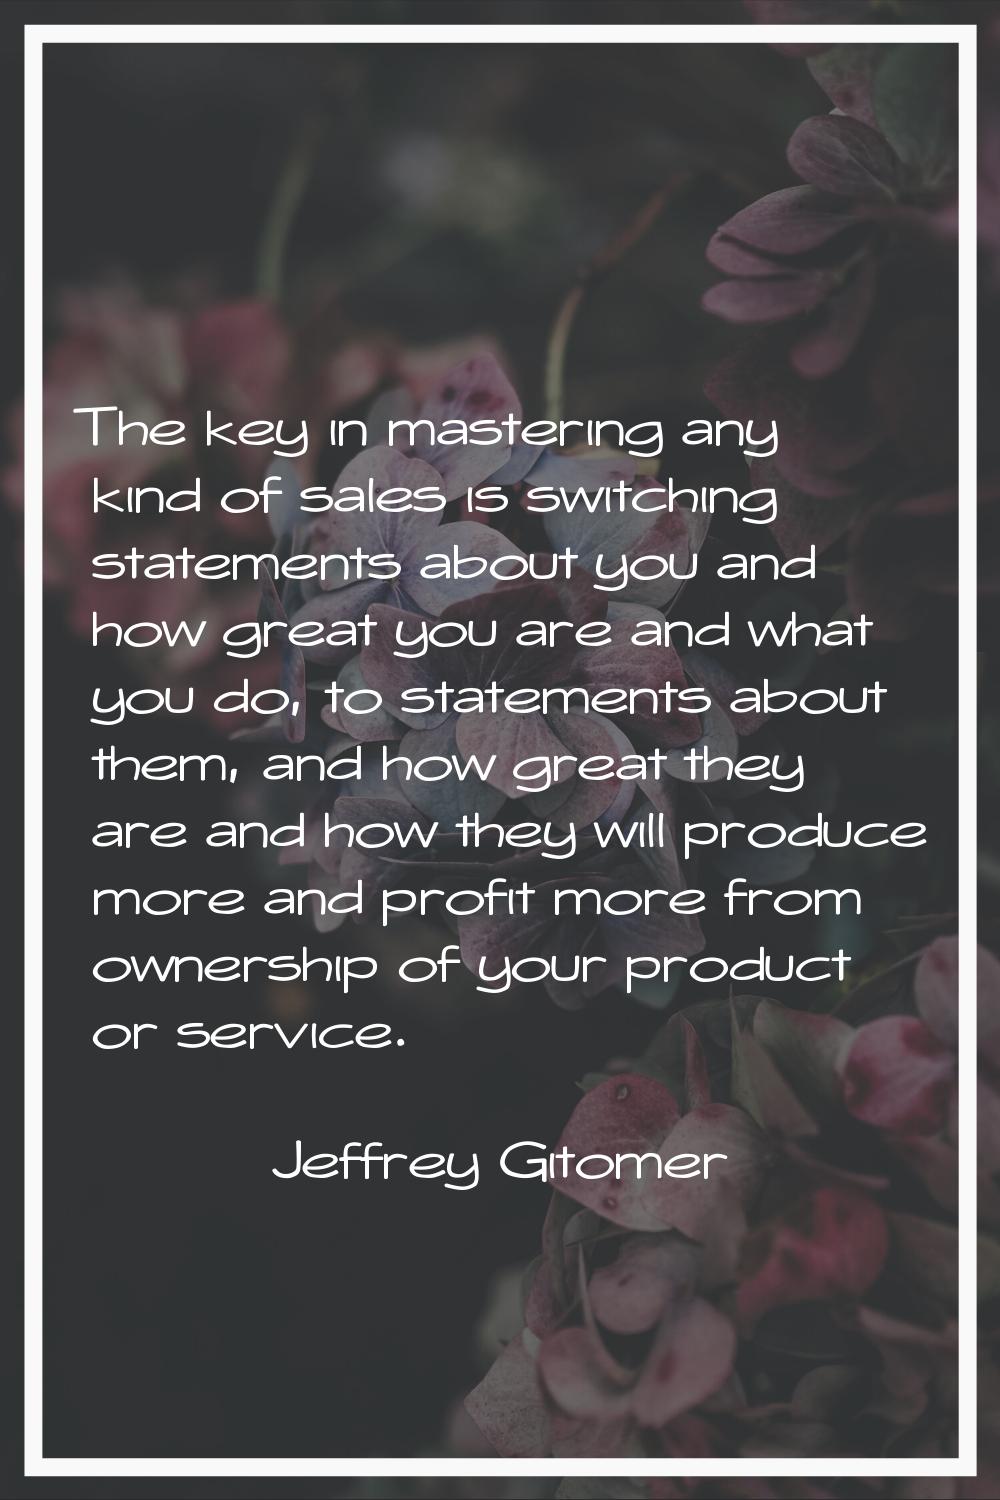 The key in mastering any kind of sales is switching statements about you and how great you are and 